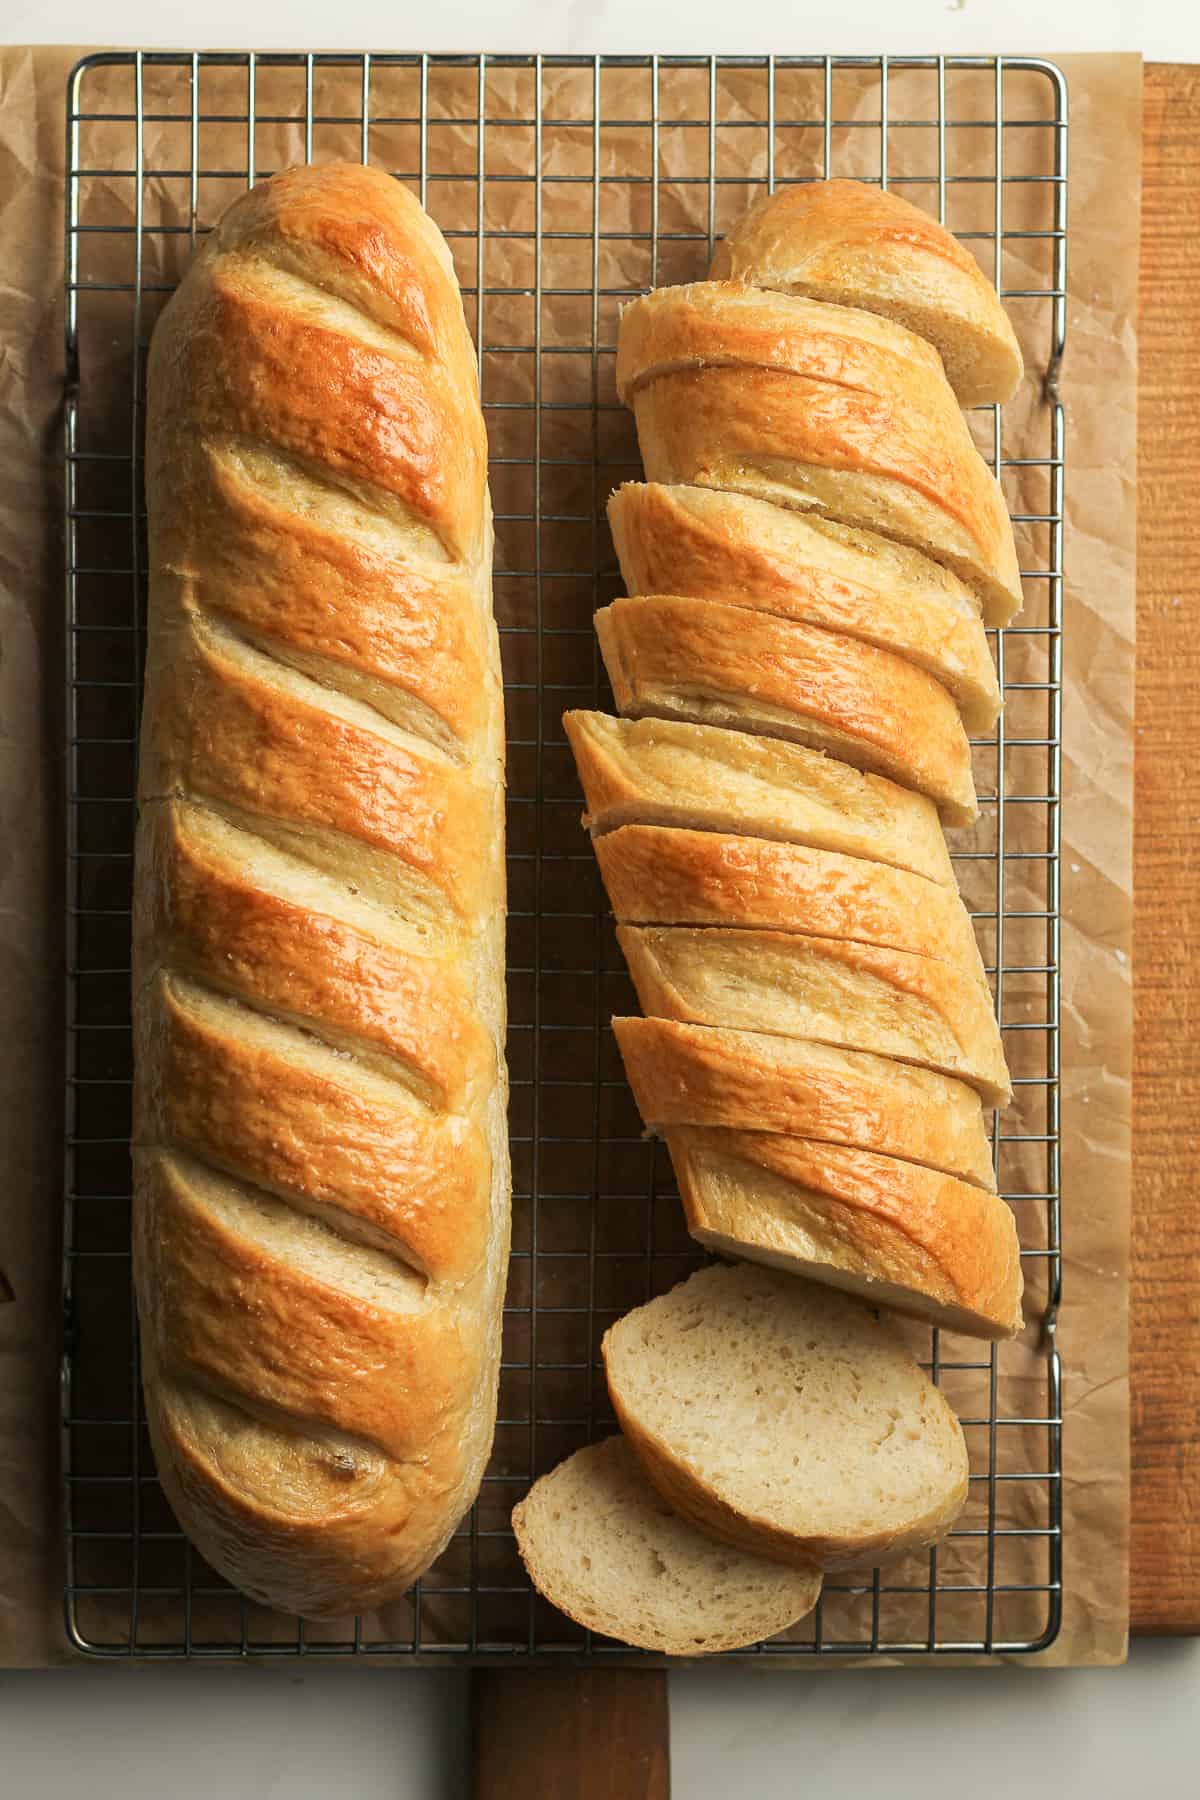 A large loaf of French bread beside a loaf of sliced bread.